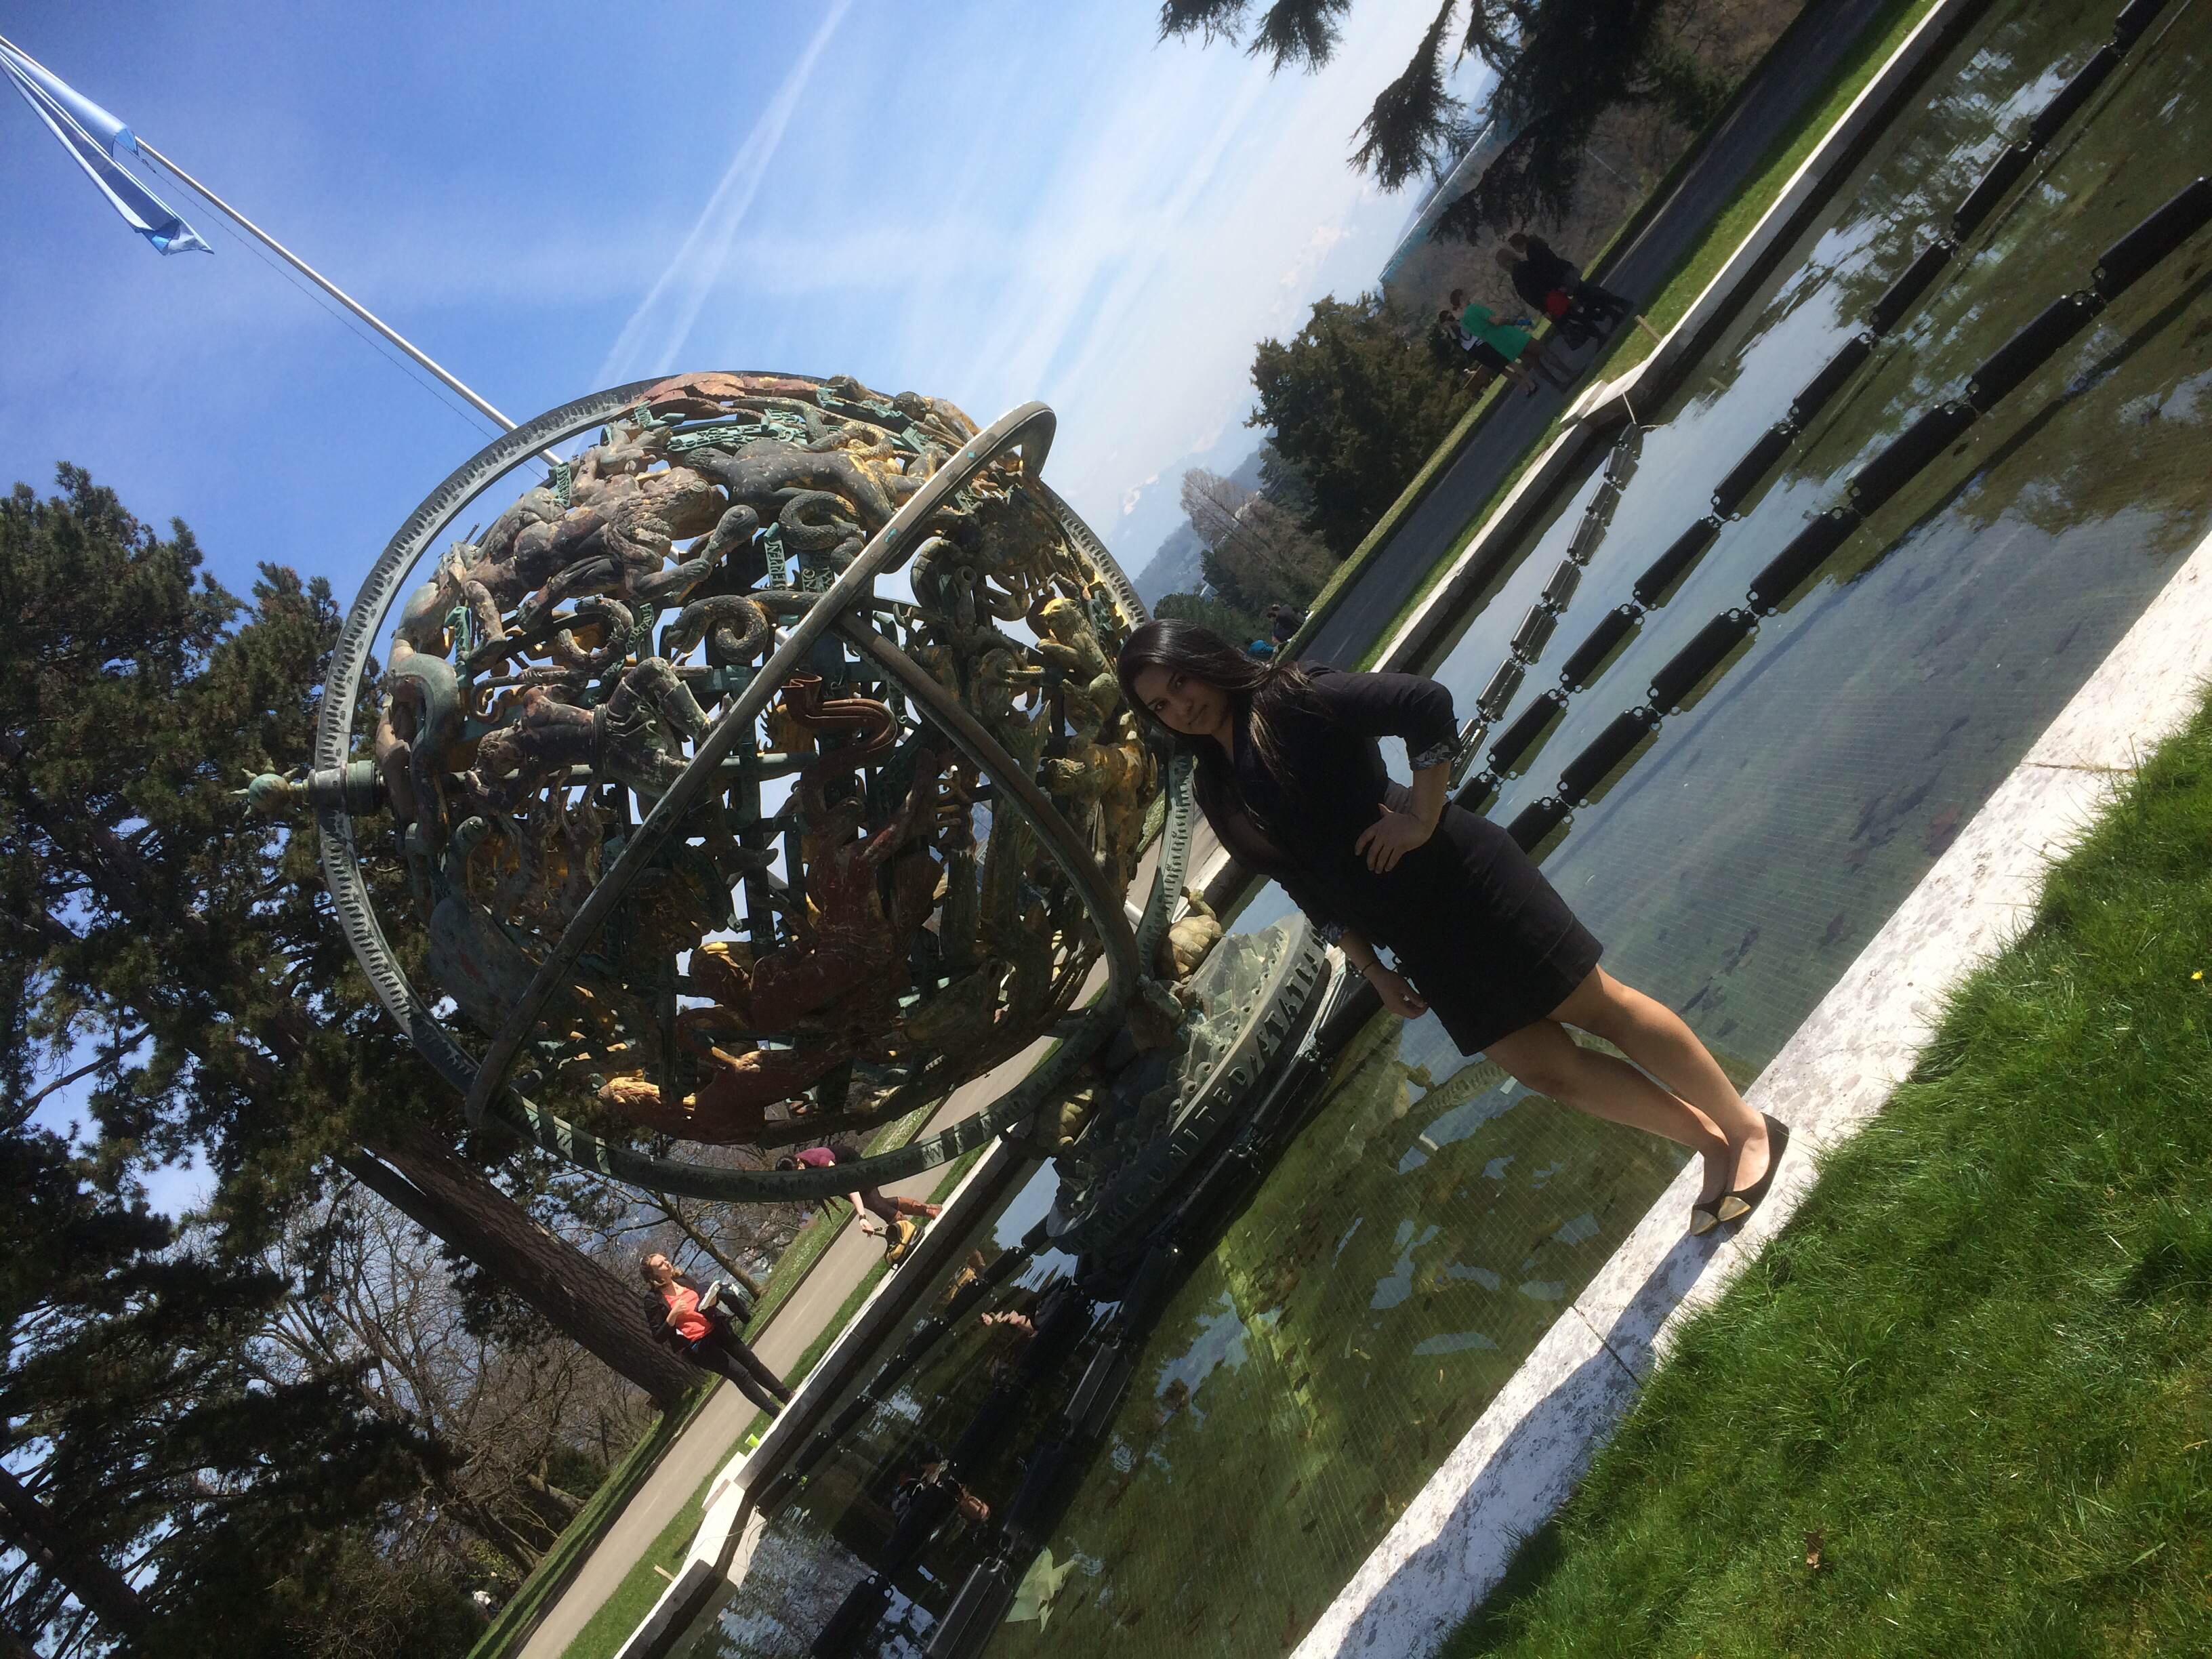 Rumsha Zahid '15 in the gardens of the Palais des Nations at the 2014 Geneva International Model UN conference in Switzerland.